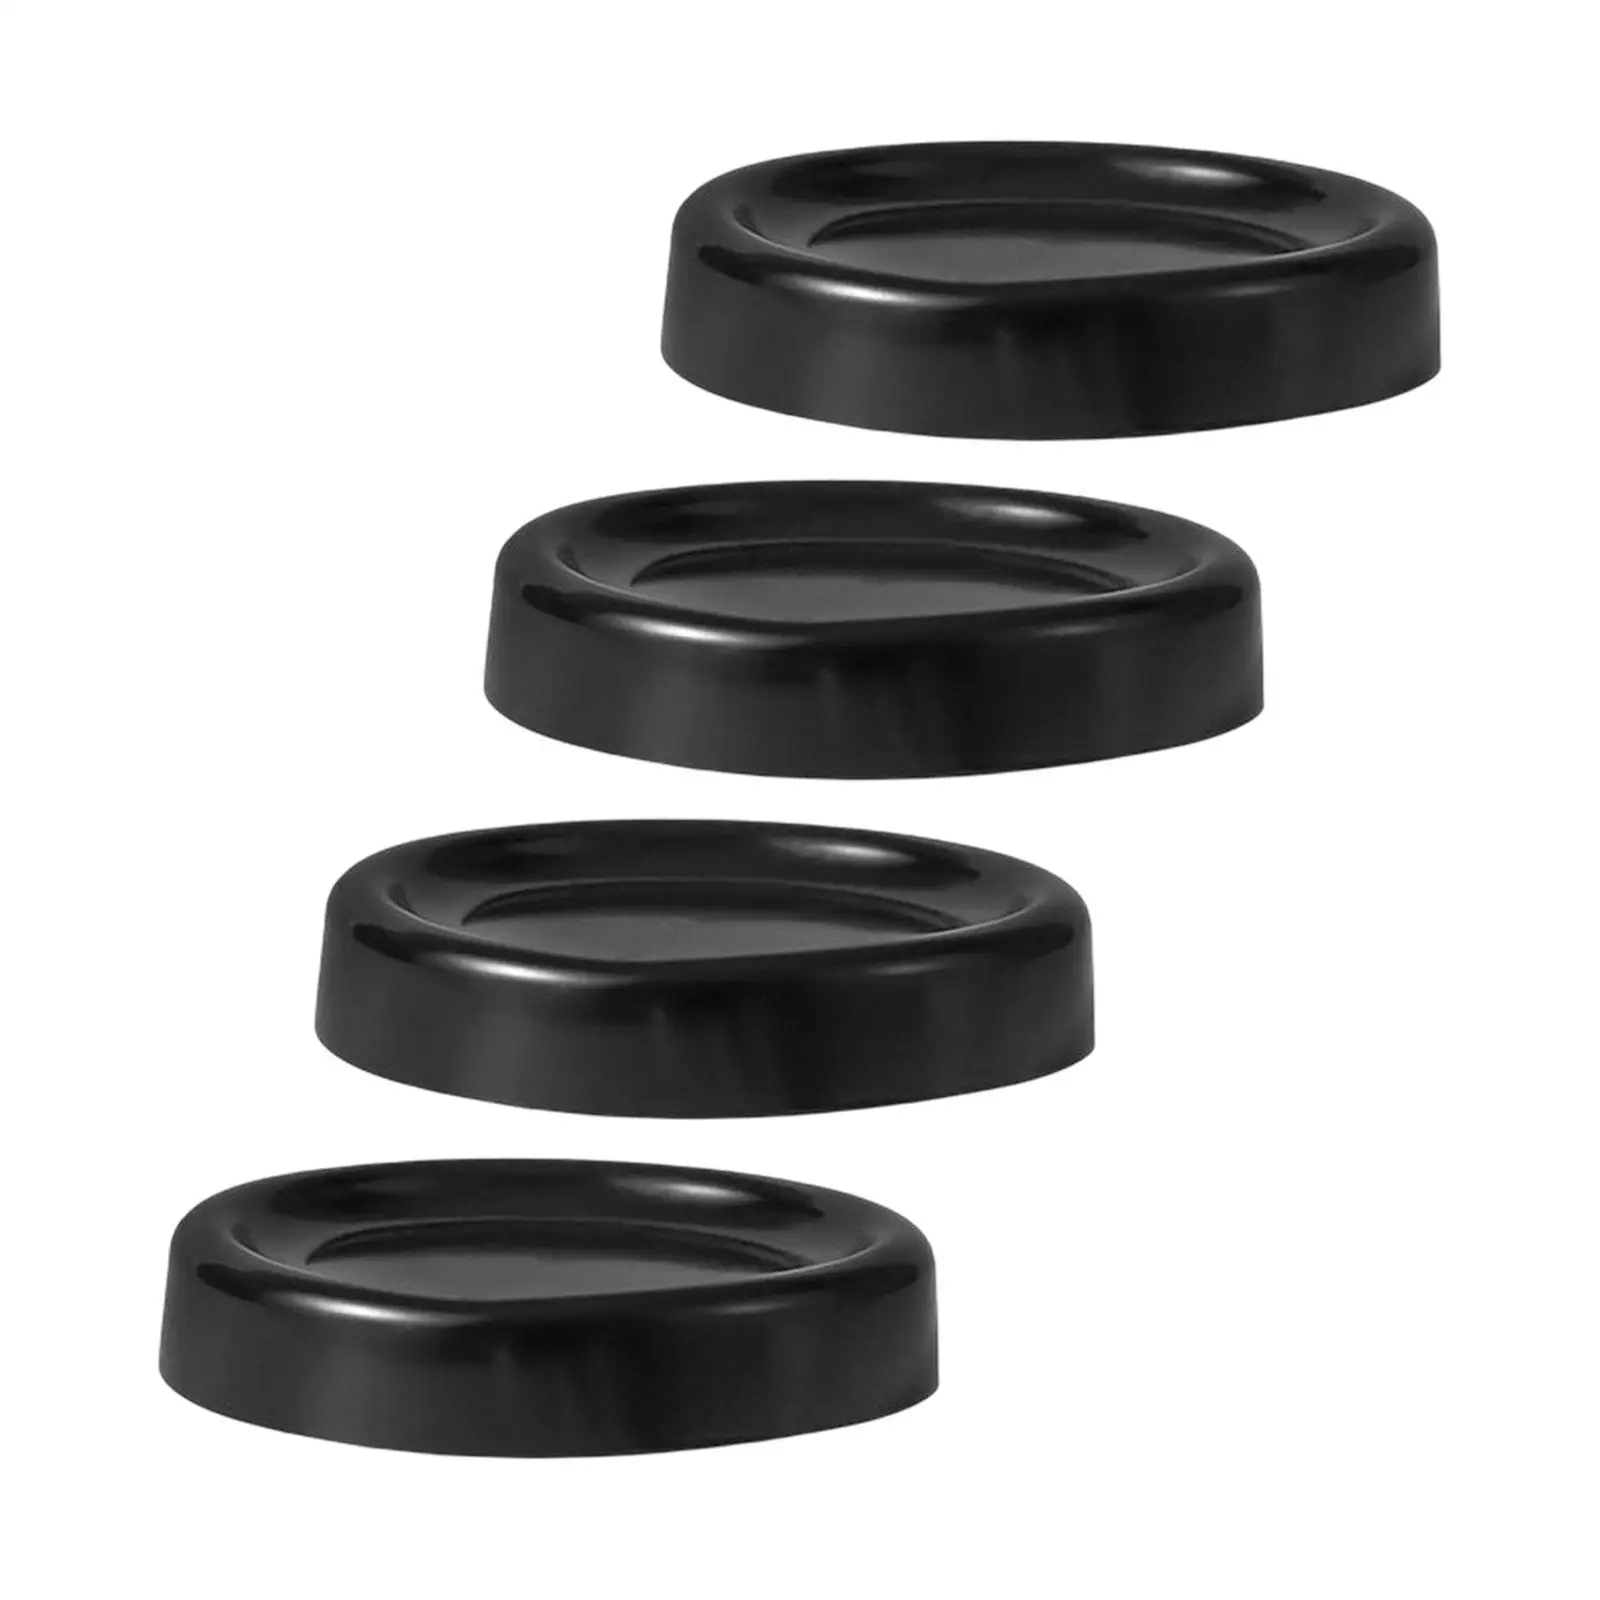 4 Pieces Anti Vibration Pads Washer And Dryer Pedestals for Fridge Cabinet